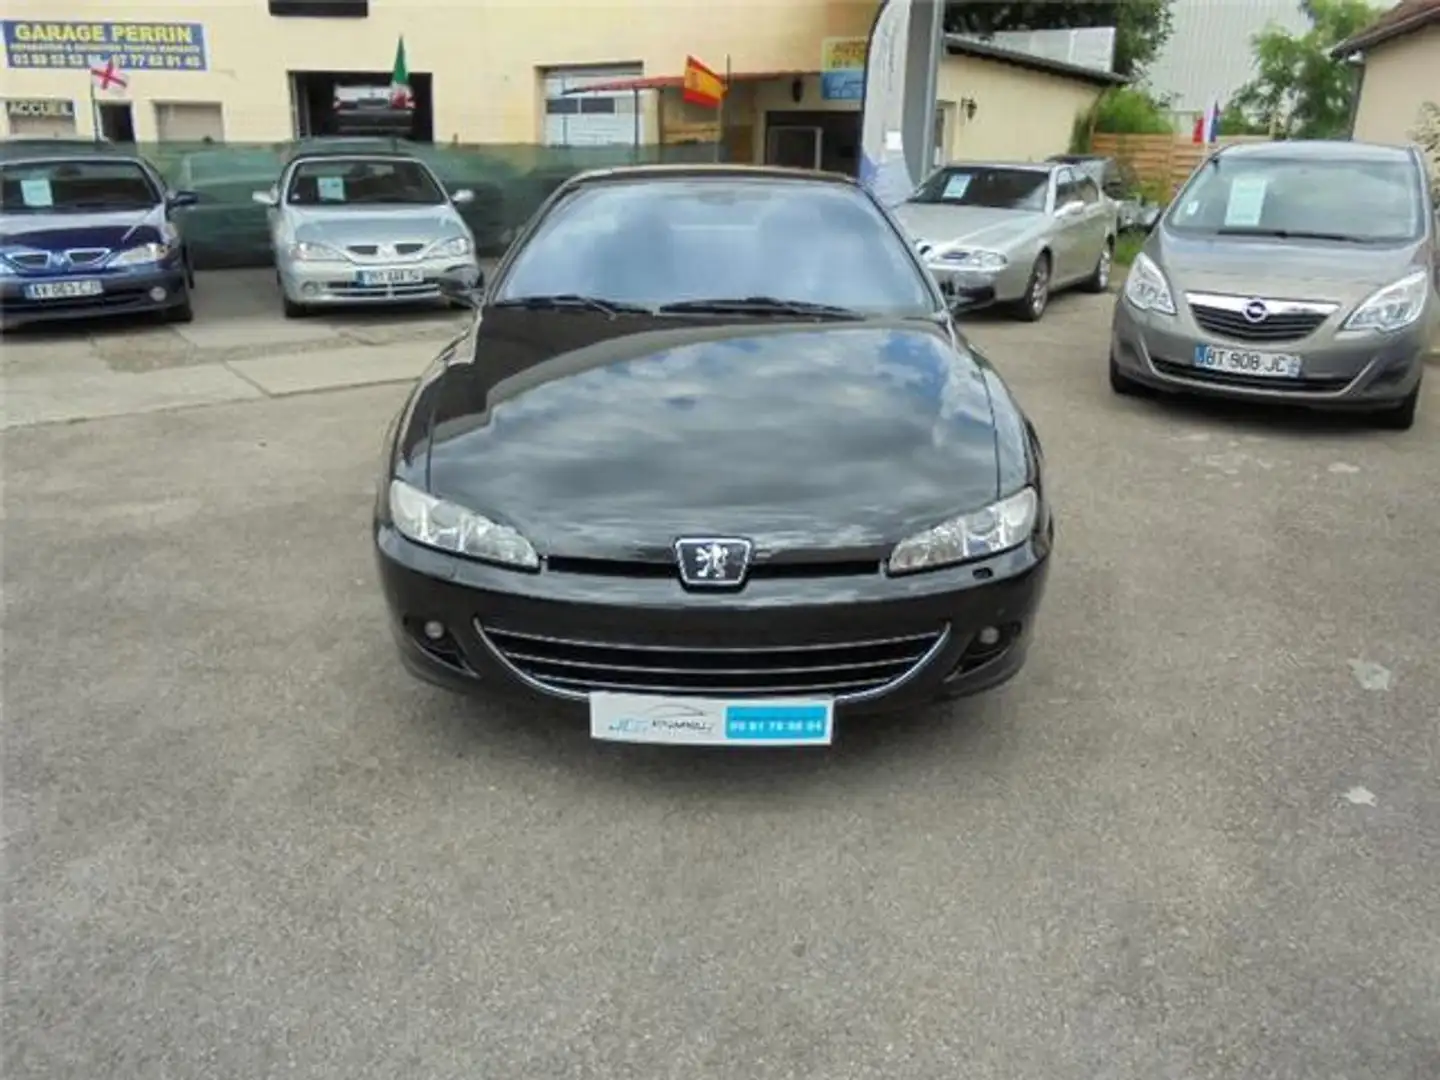 Peugeot 406 COUPE 2.2 HDI136 GRIFFE Zwart - 2